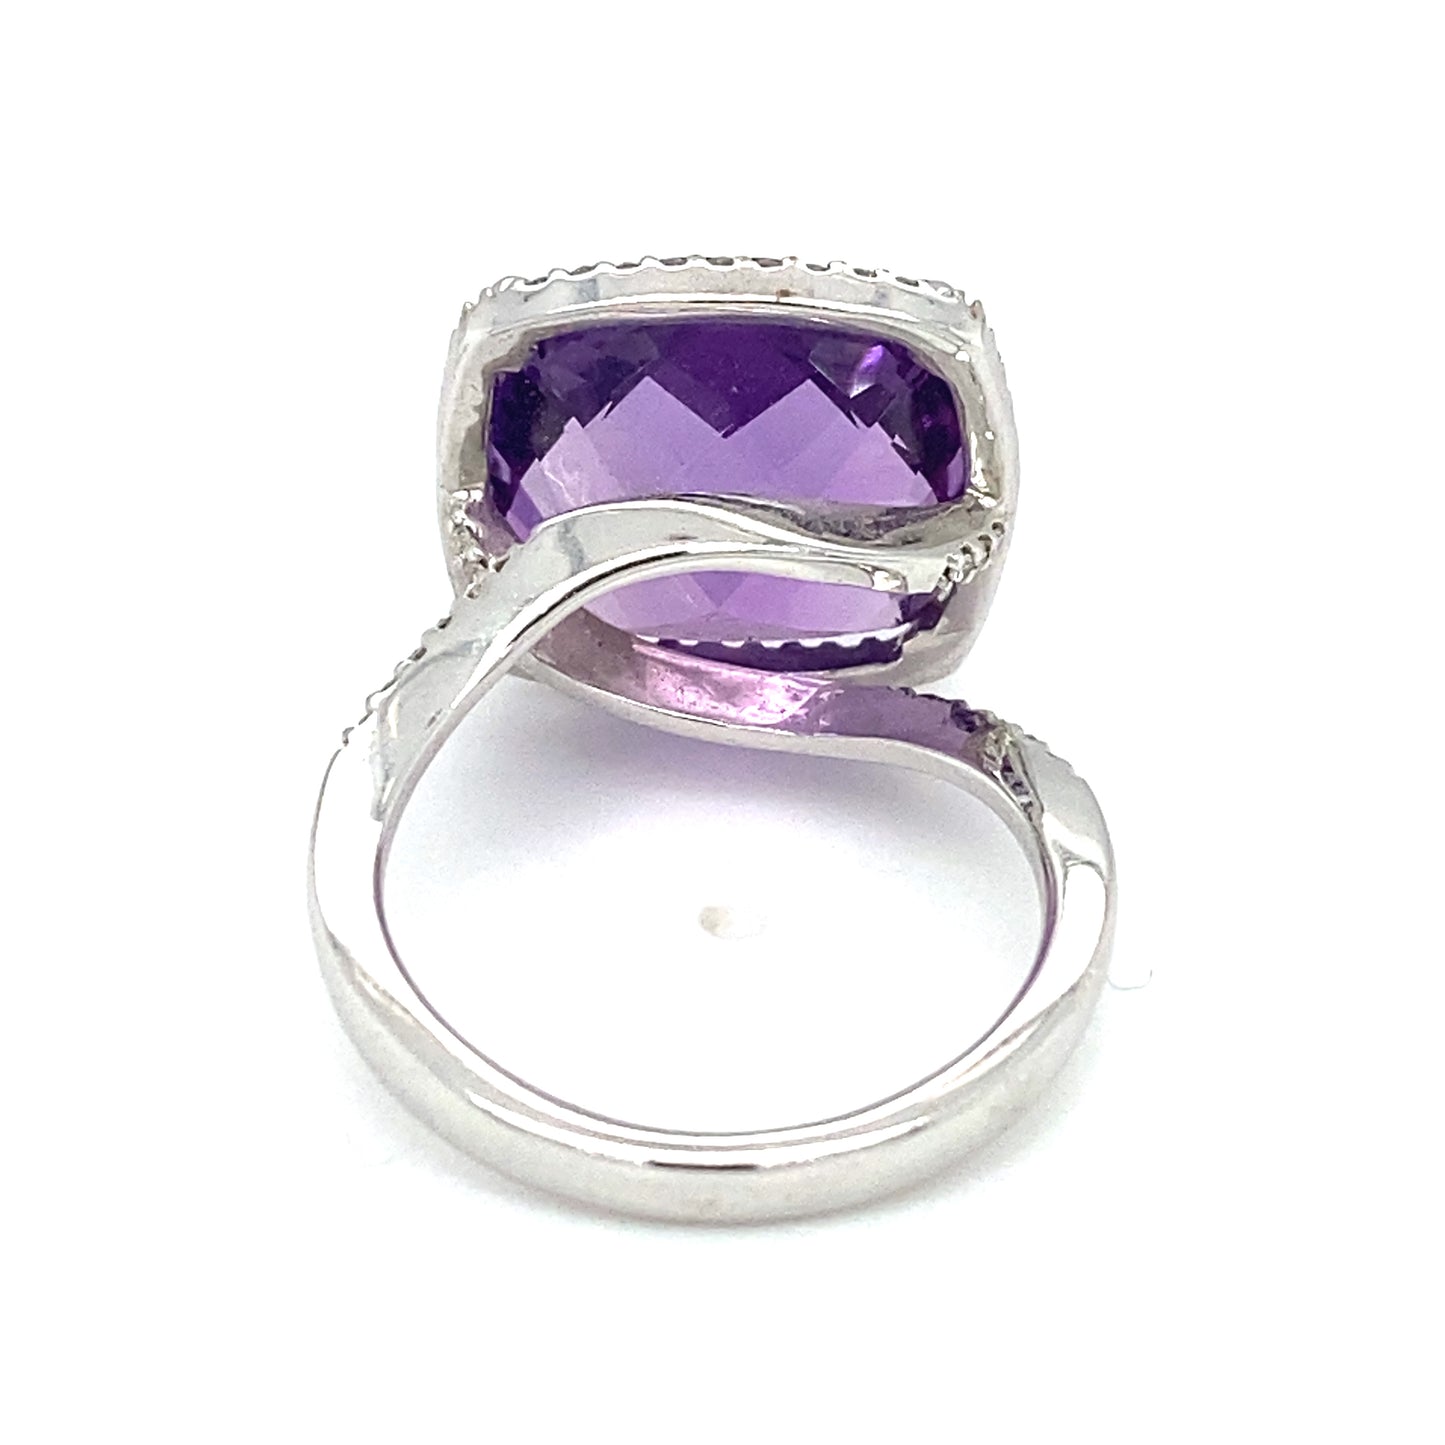 Circa 2000s 8.0ct Amethyst and Diamond Cocktail Ring in 14K White Gold